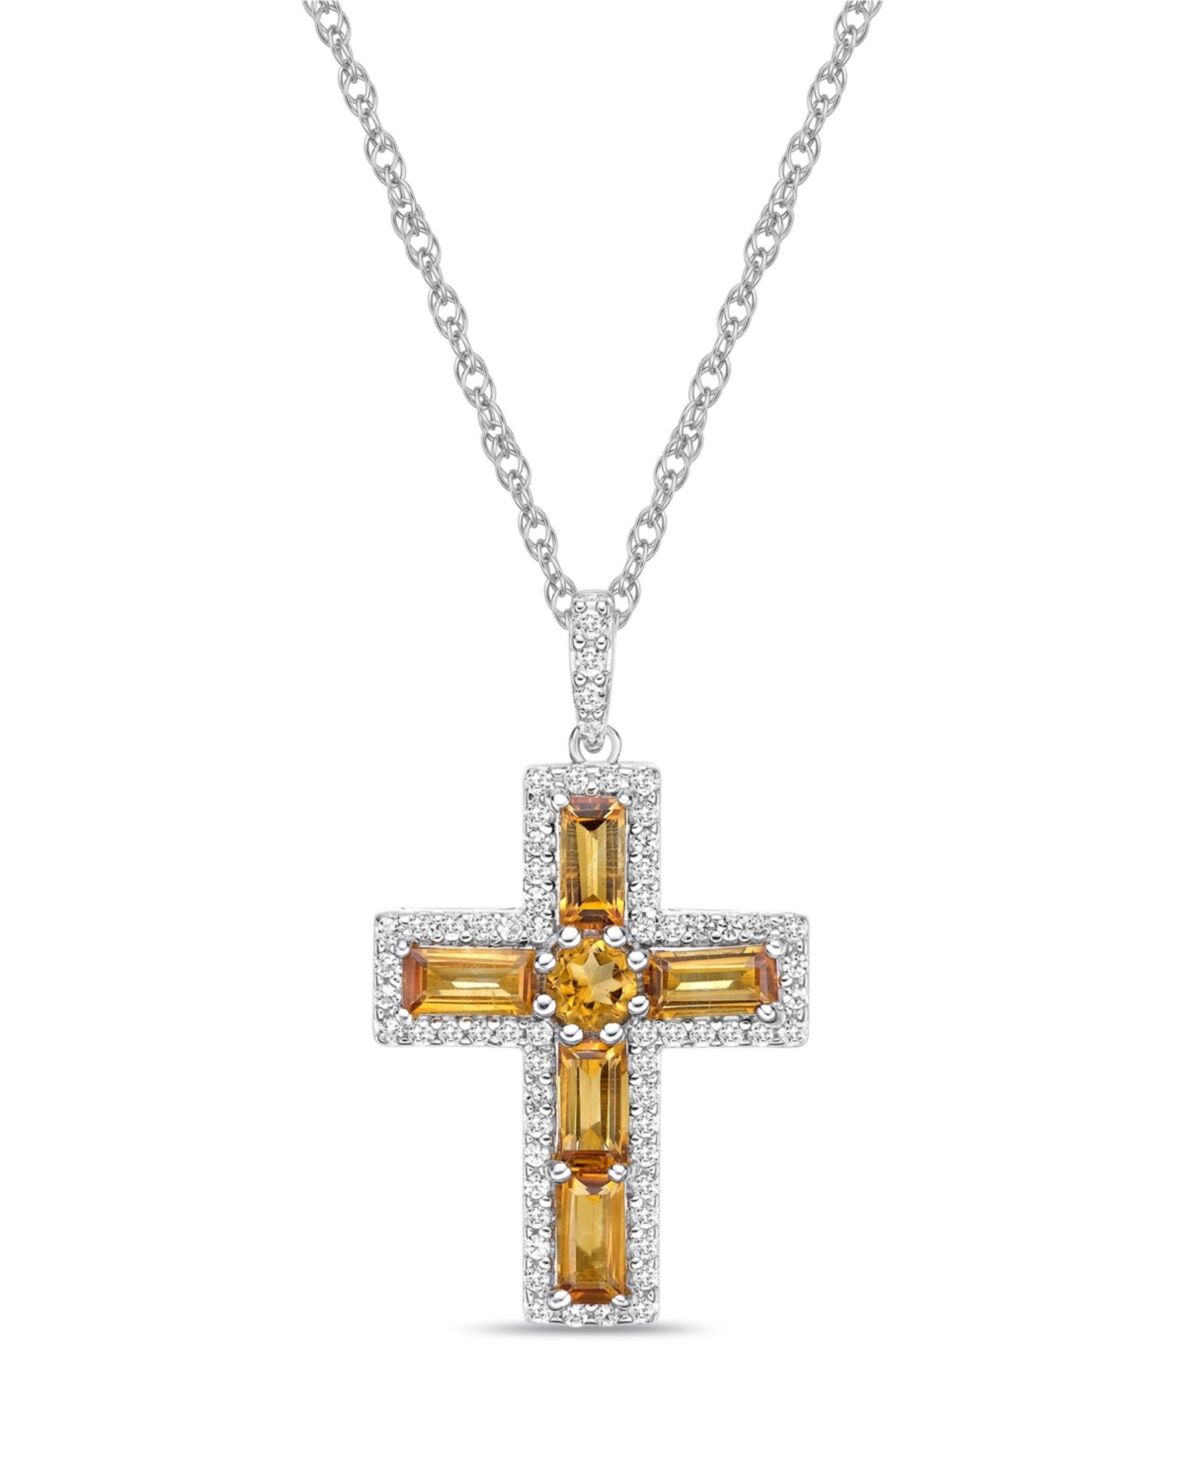 Macy's Sterling Silver Halo Birthstone Style Genuine Citrine and White Topaz Fancy Cut Cross Pendant Necklace - Citrine